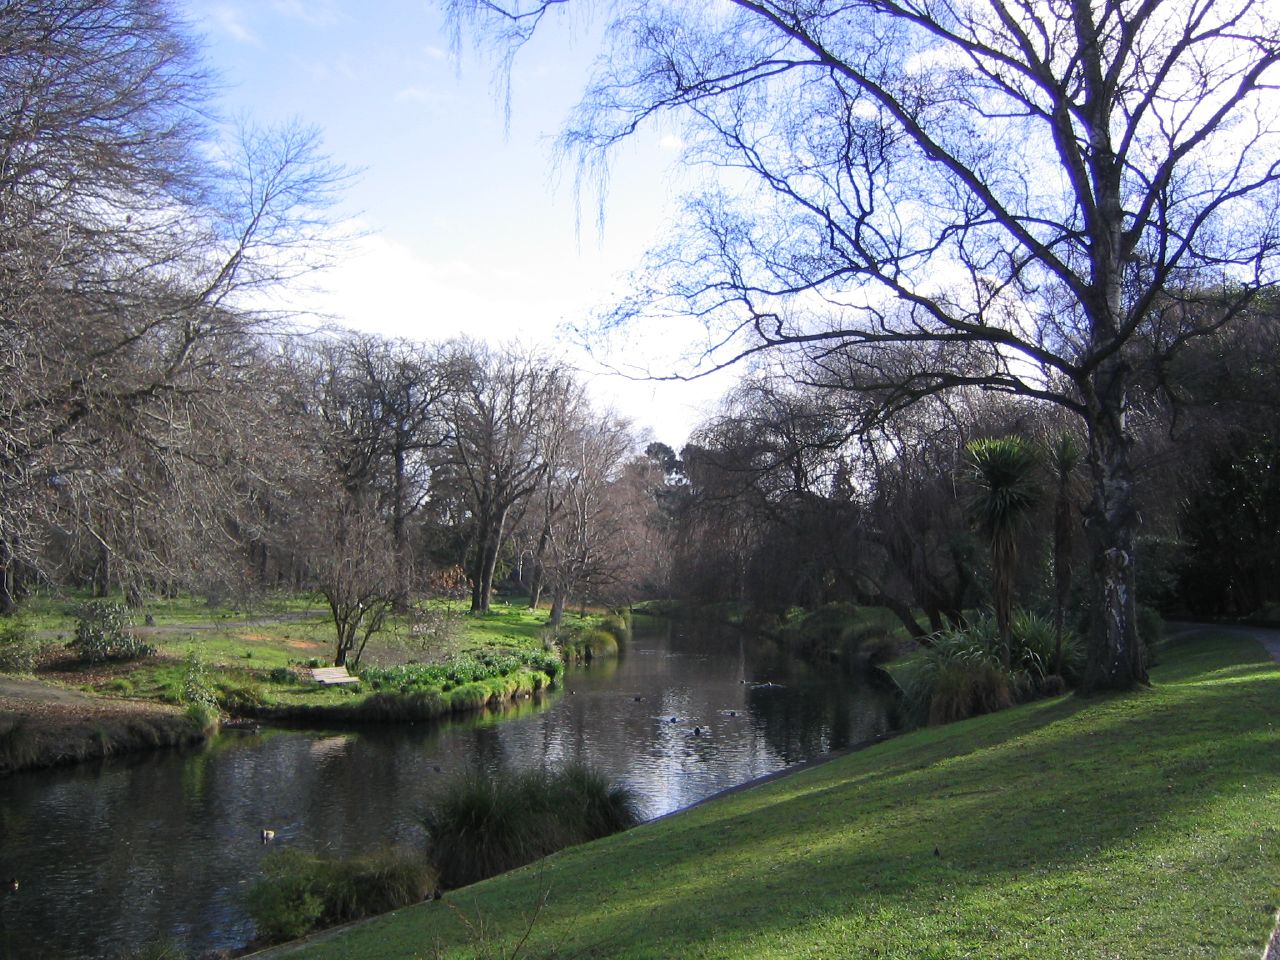 a river runs through the park and next to trees